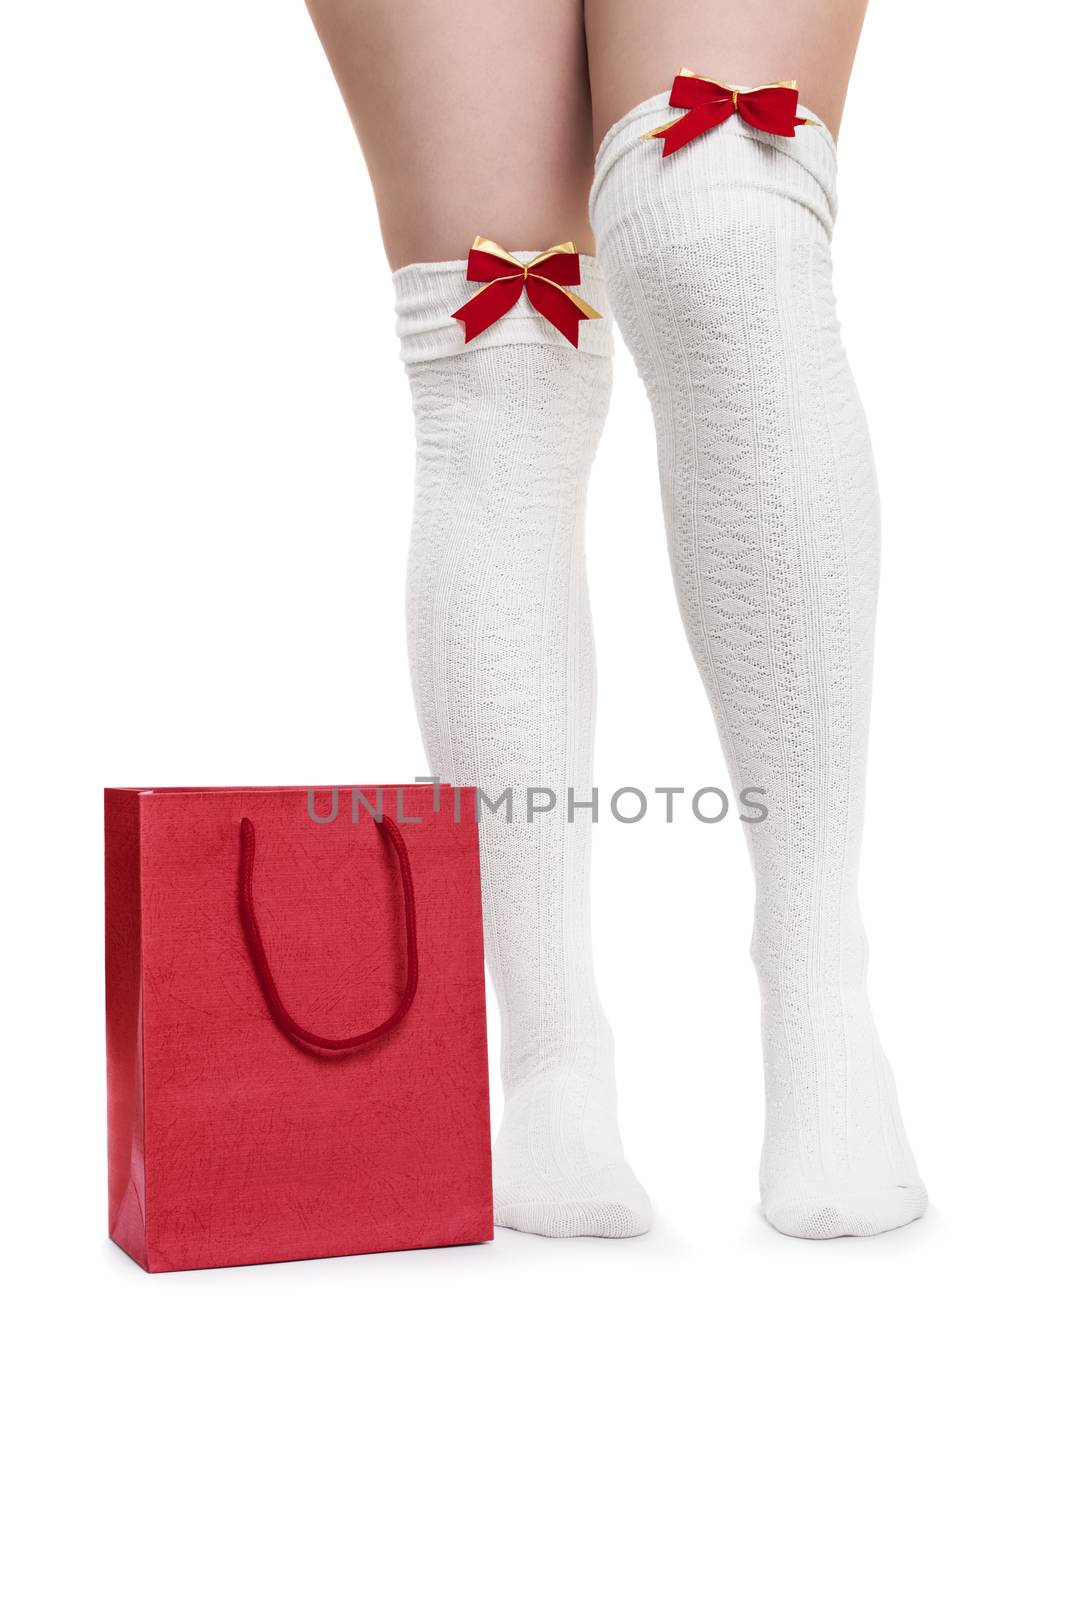 Female legs in white stockings next to a gift bag by Mendelex